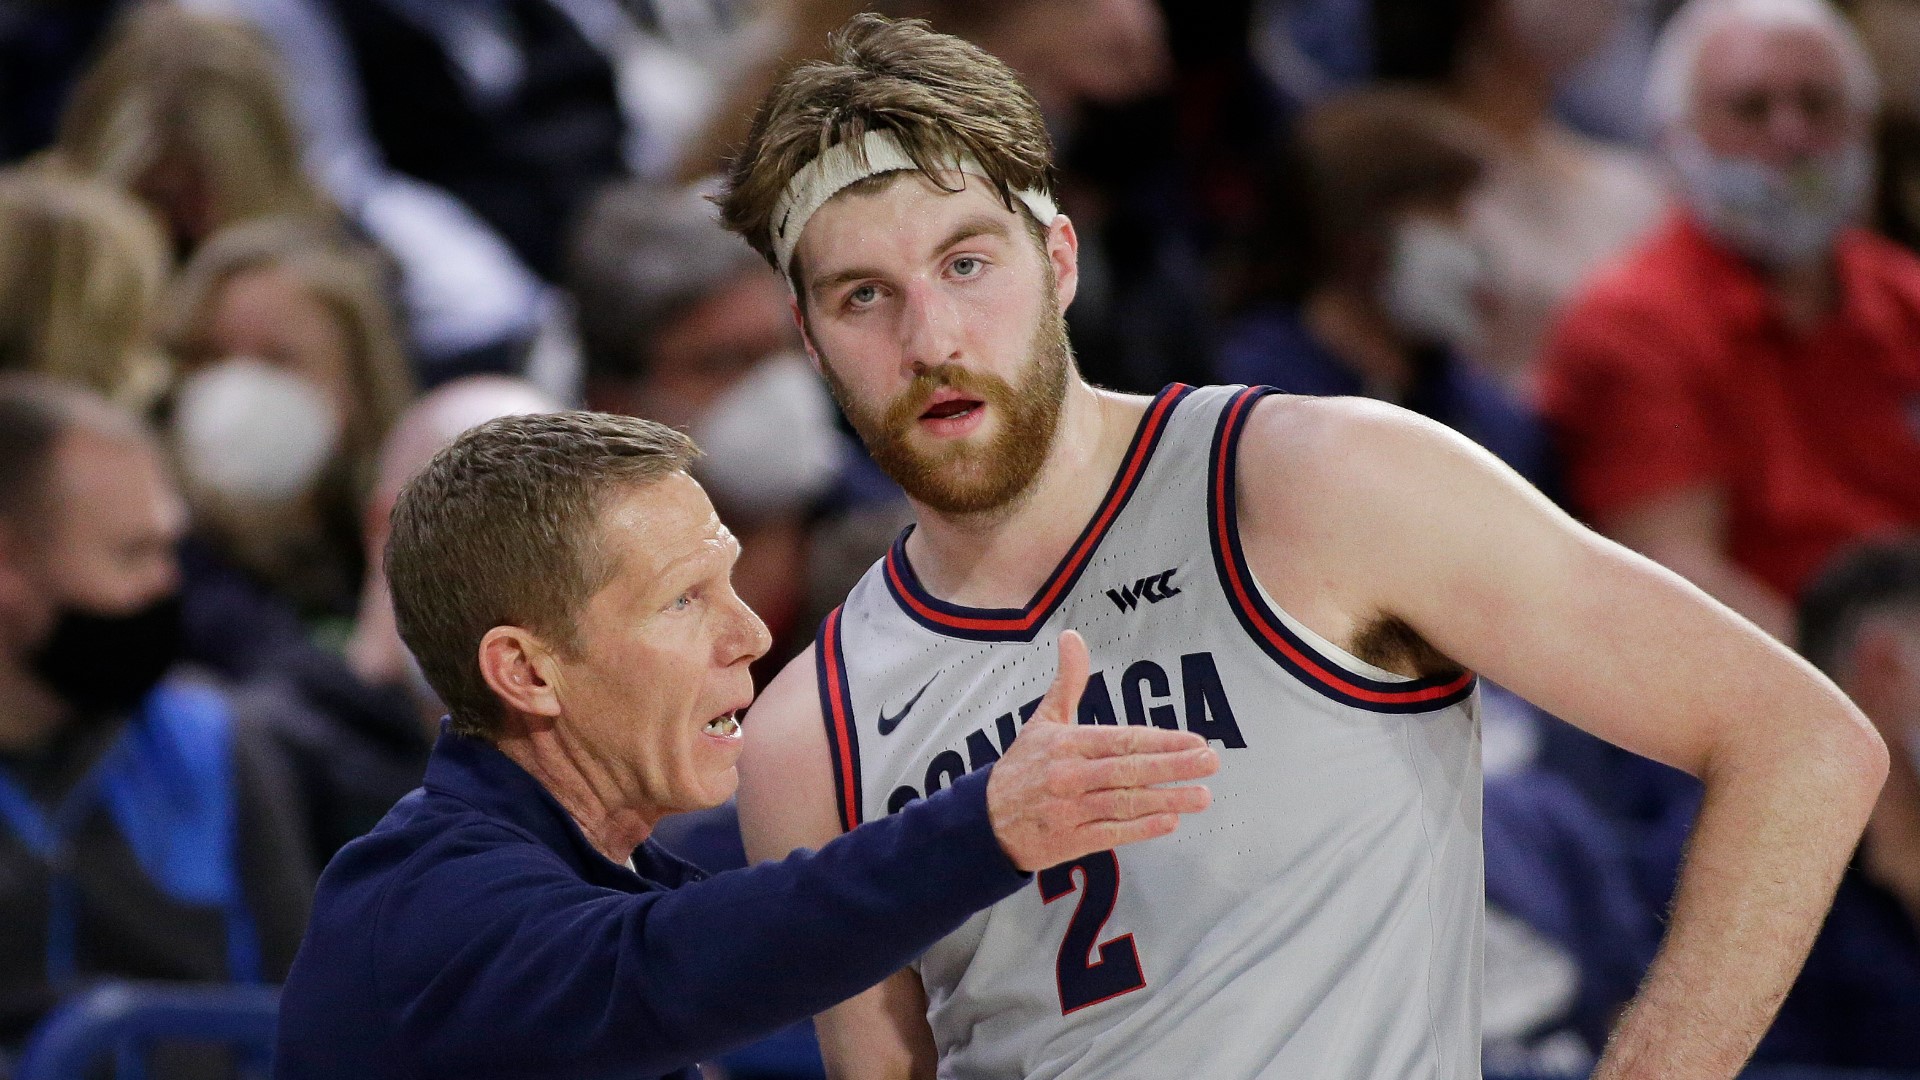 The No. 2 Gonzaga Bulldogs begin the new basketball season with a charity exhibition game against No. 11 Tennessee on Friday night.